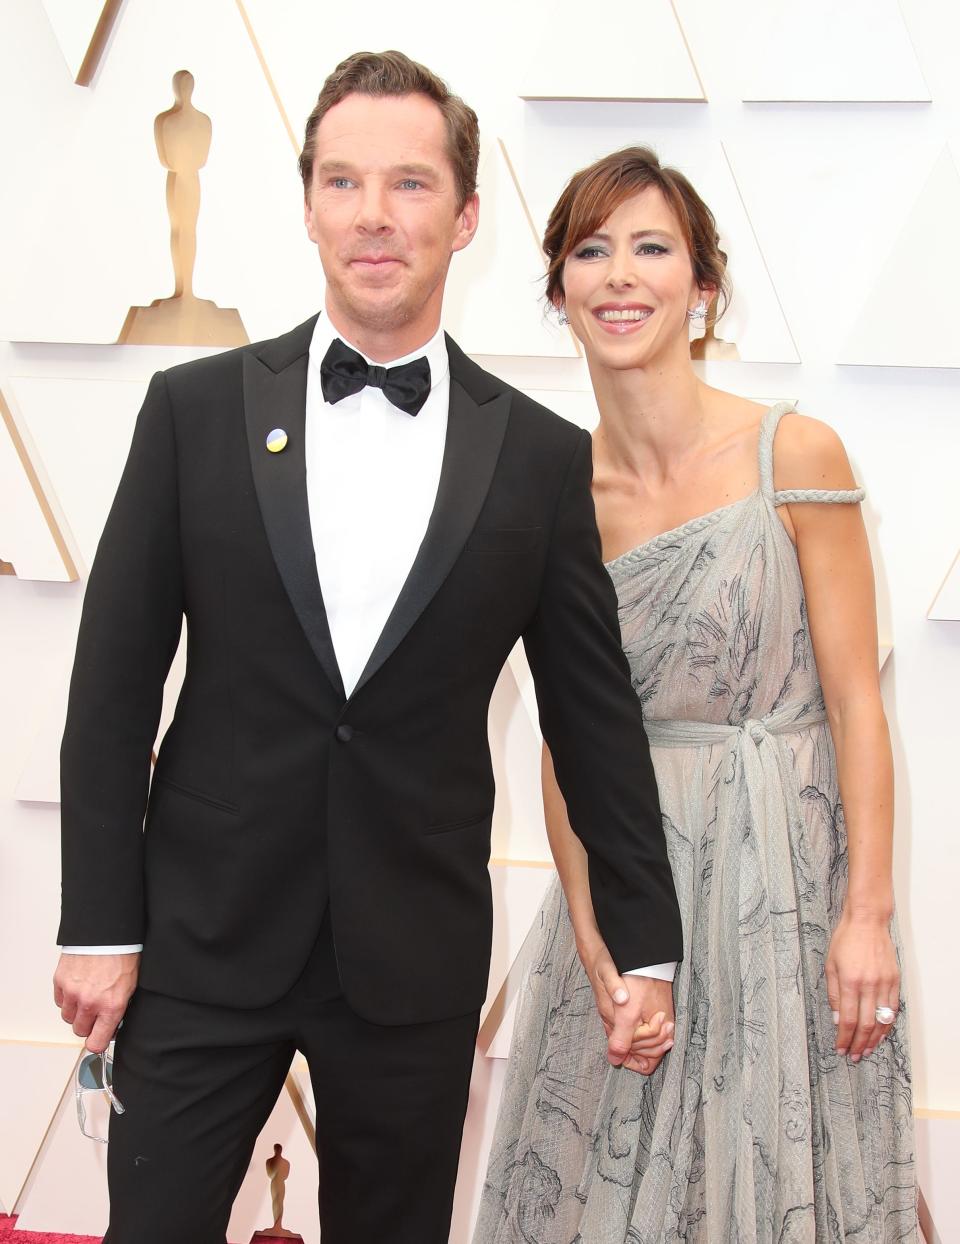 Benedict Cumberbatch and wife Sophie Hunter arrive at the 94th Academy Awards, where Cumberbatch was nominated for best actor.